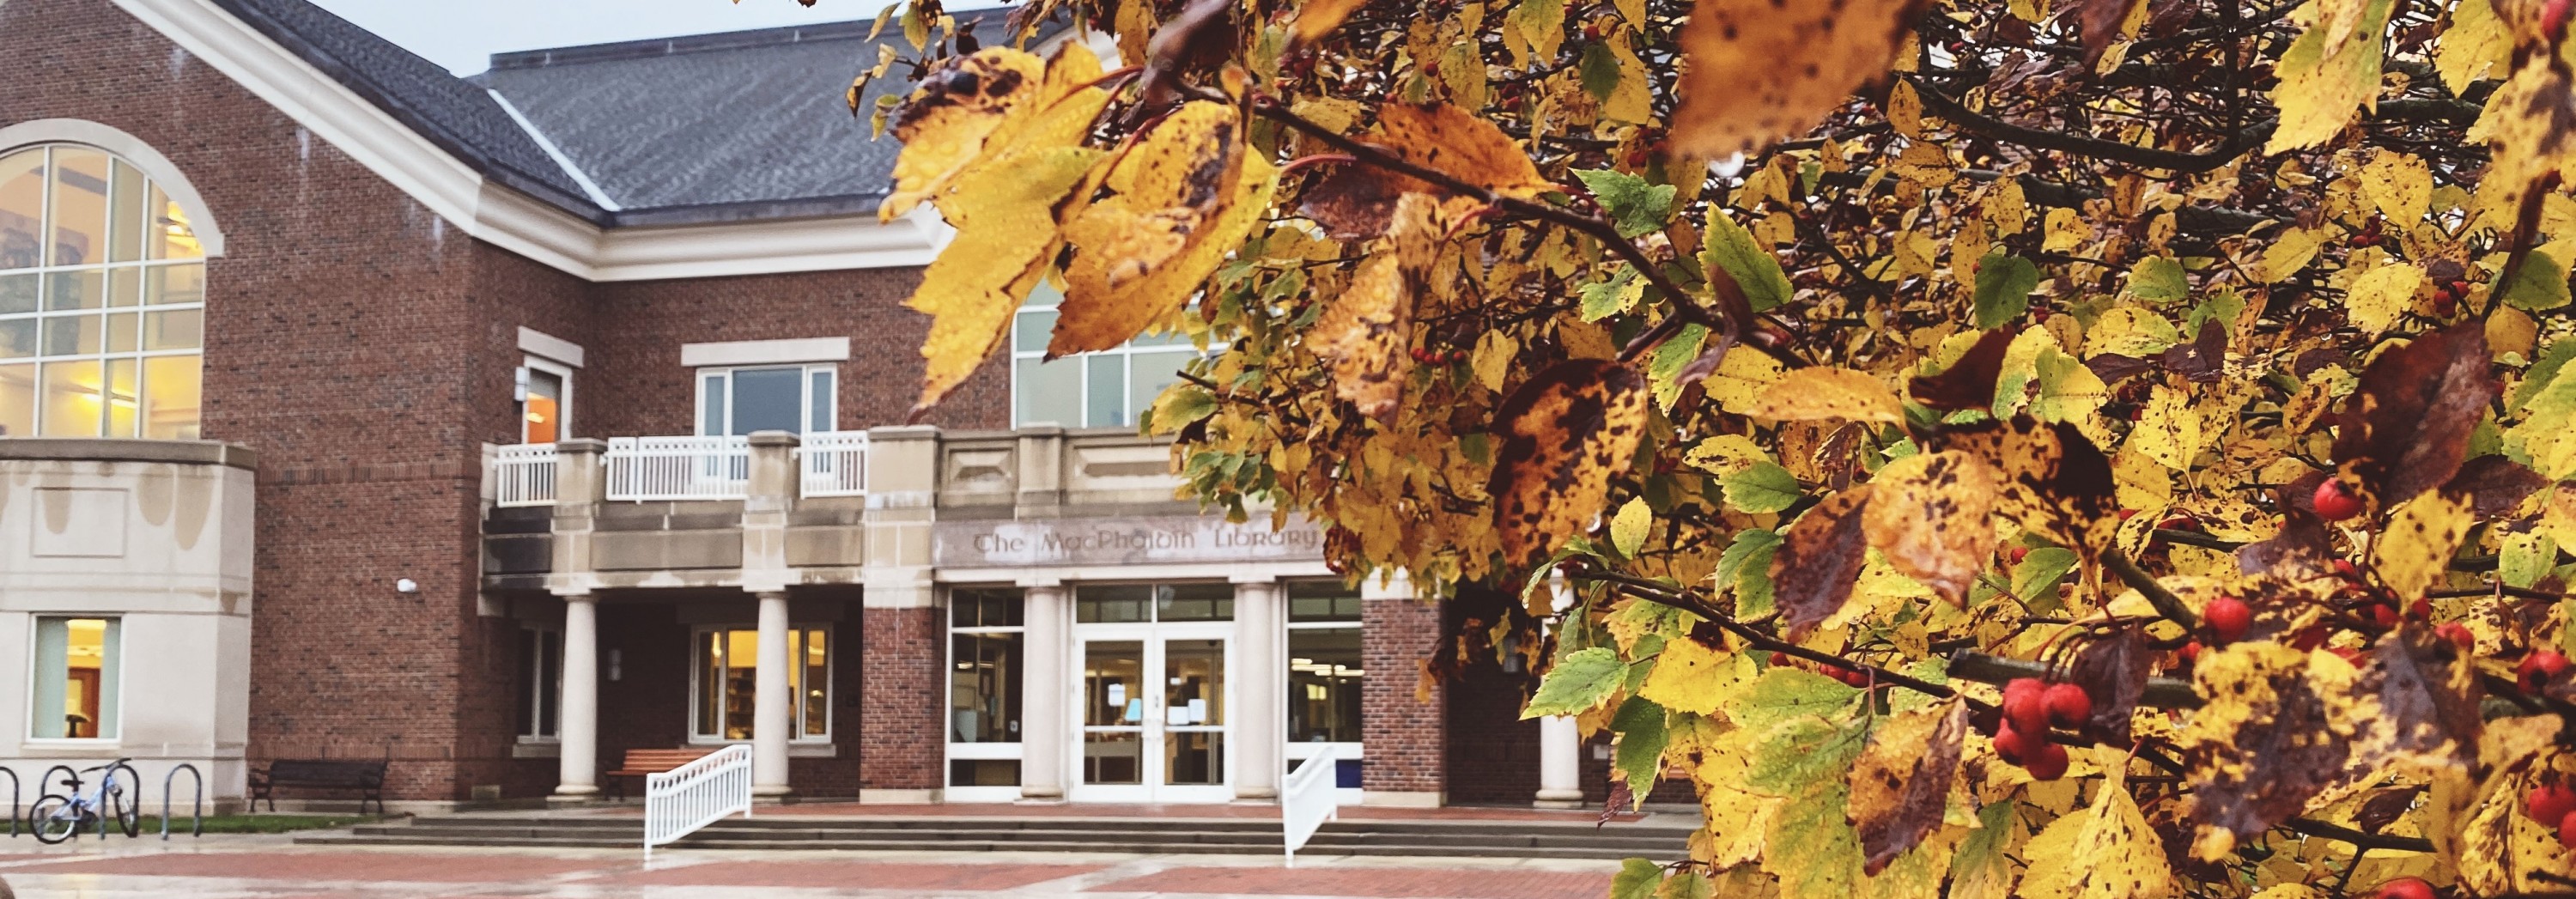 Front of library during the fall